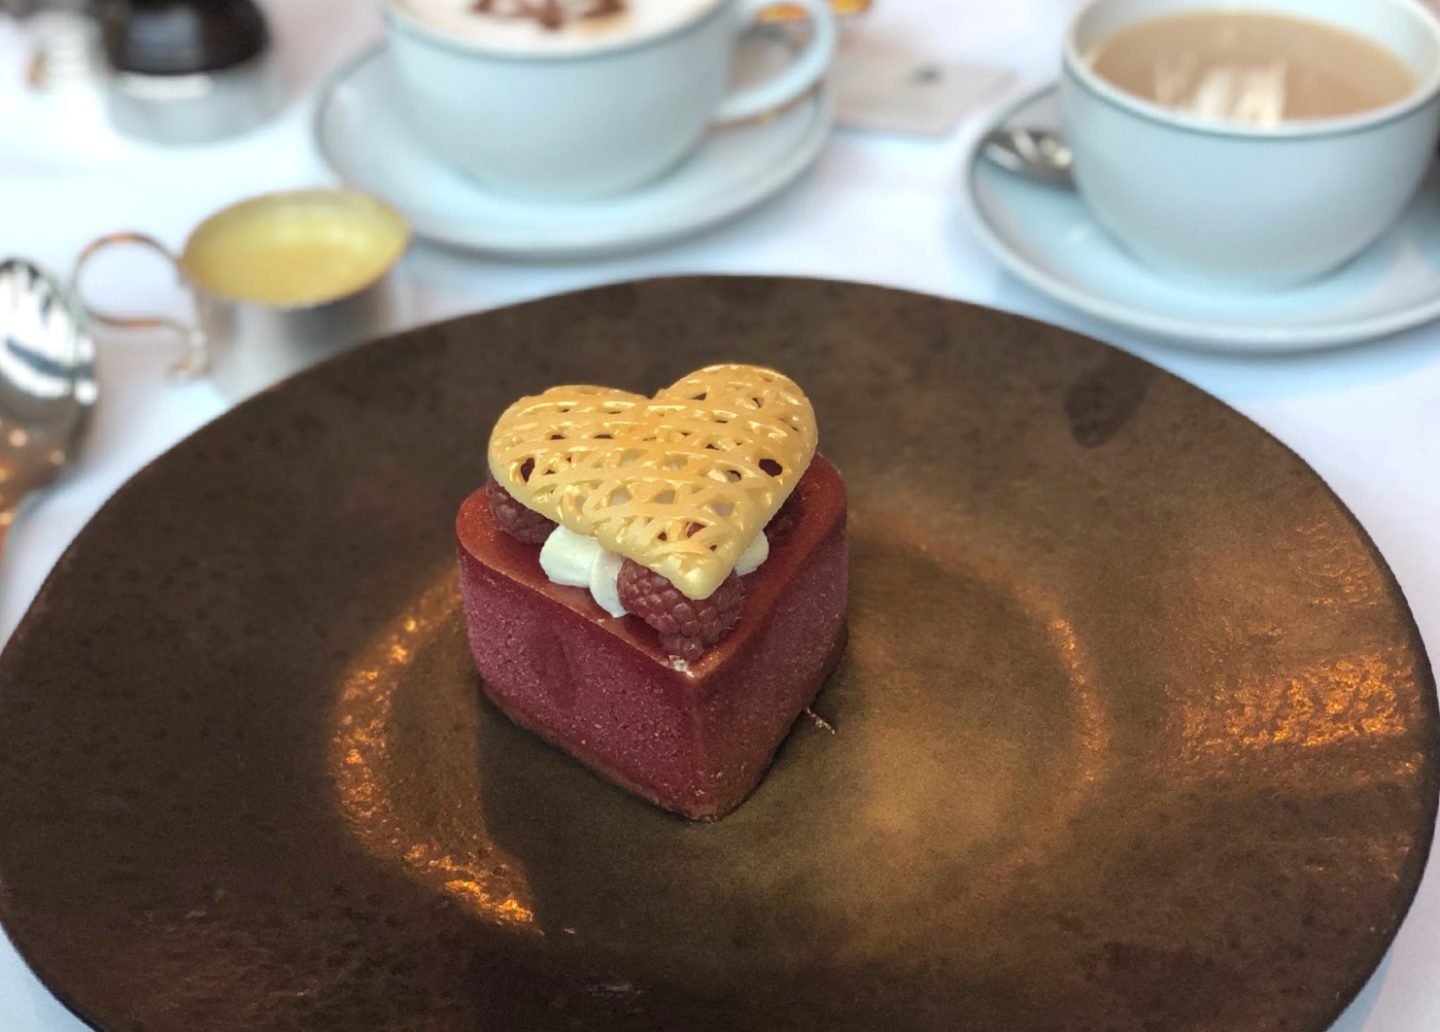 The valentines dessert at the Ivy Manchester